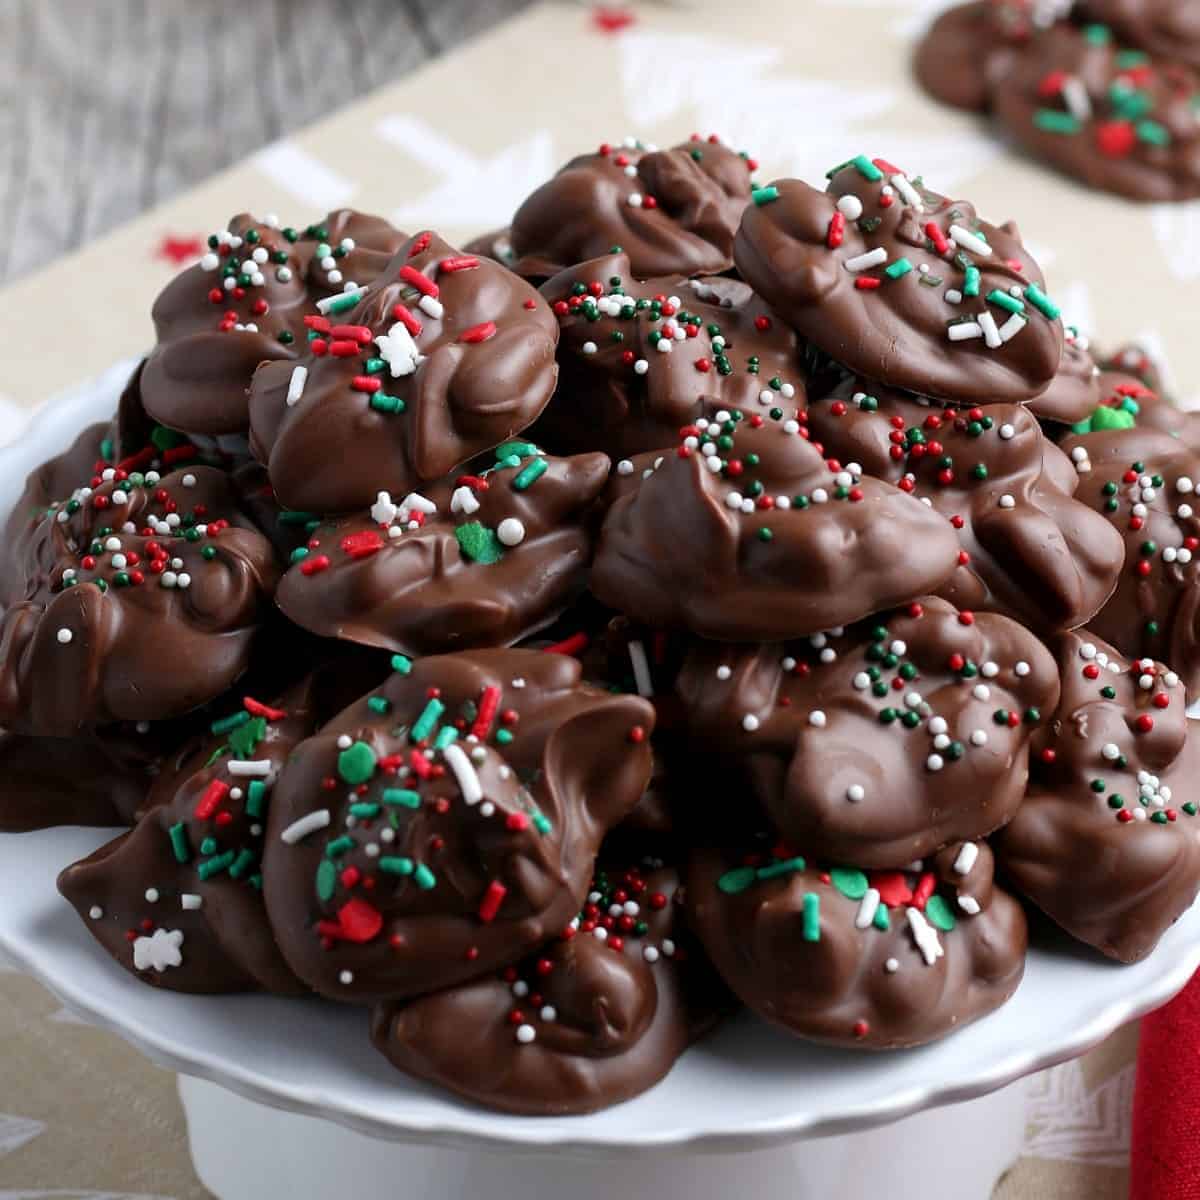 Pile of chocolate crock pot candy with Christmas sprinkles.